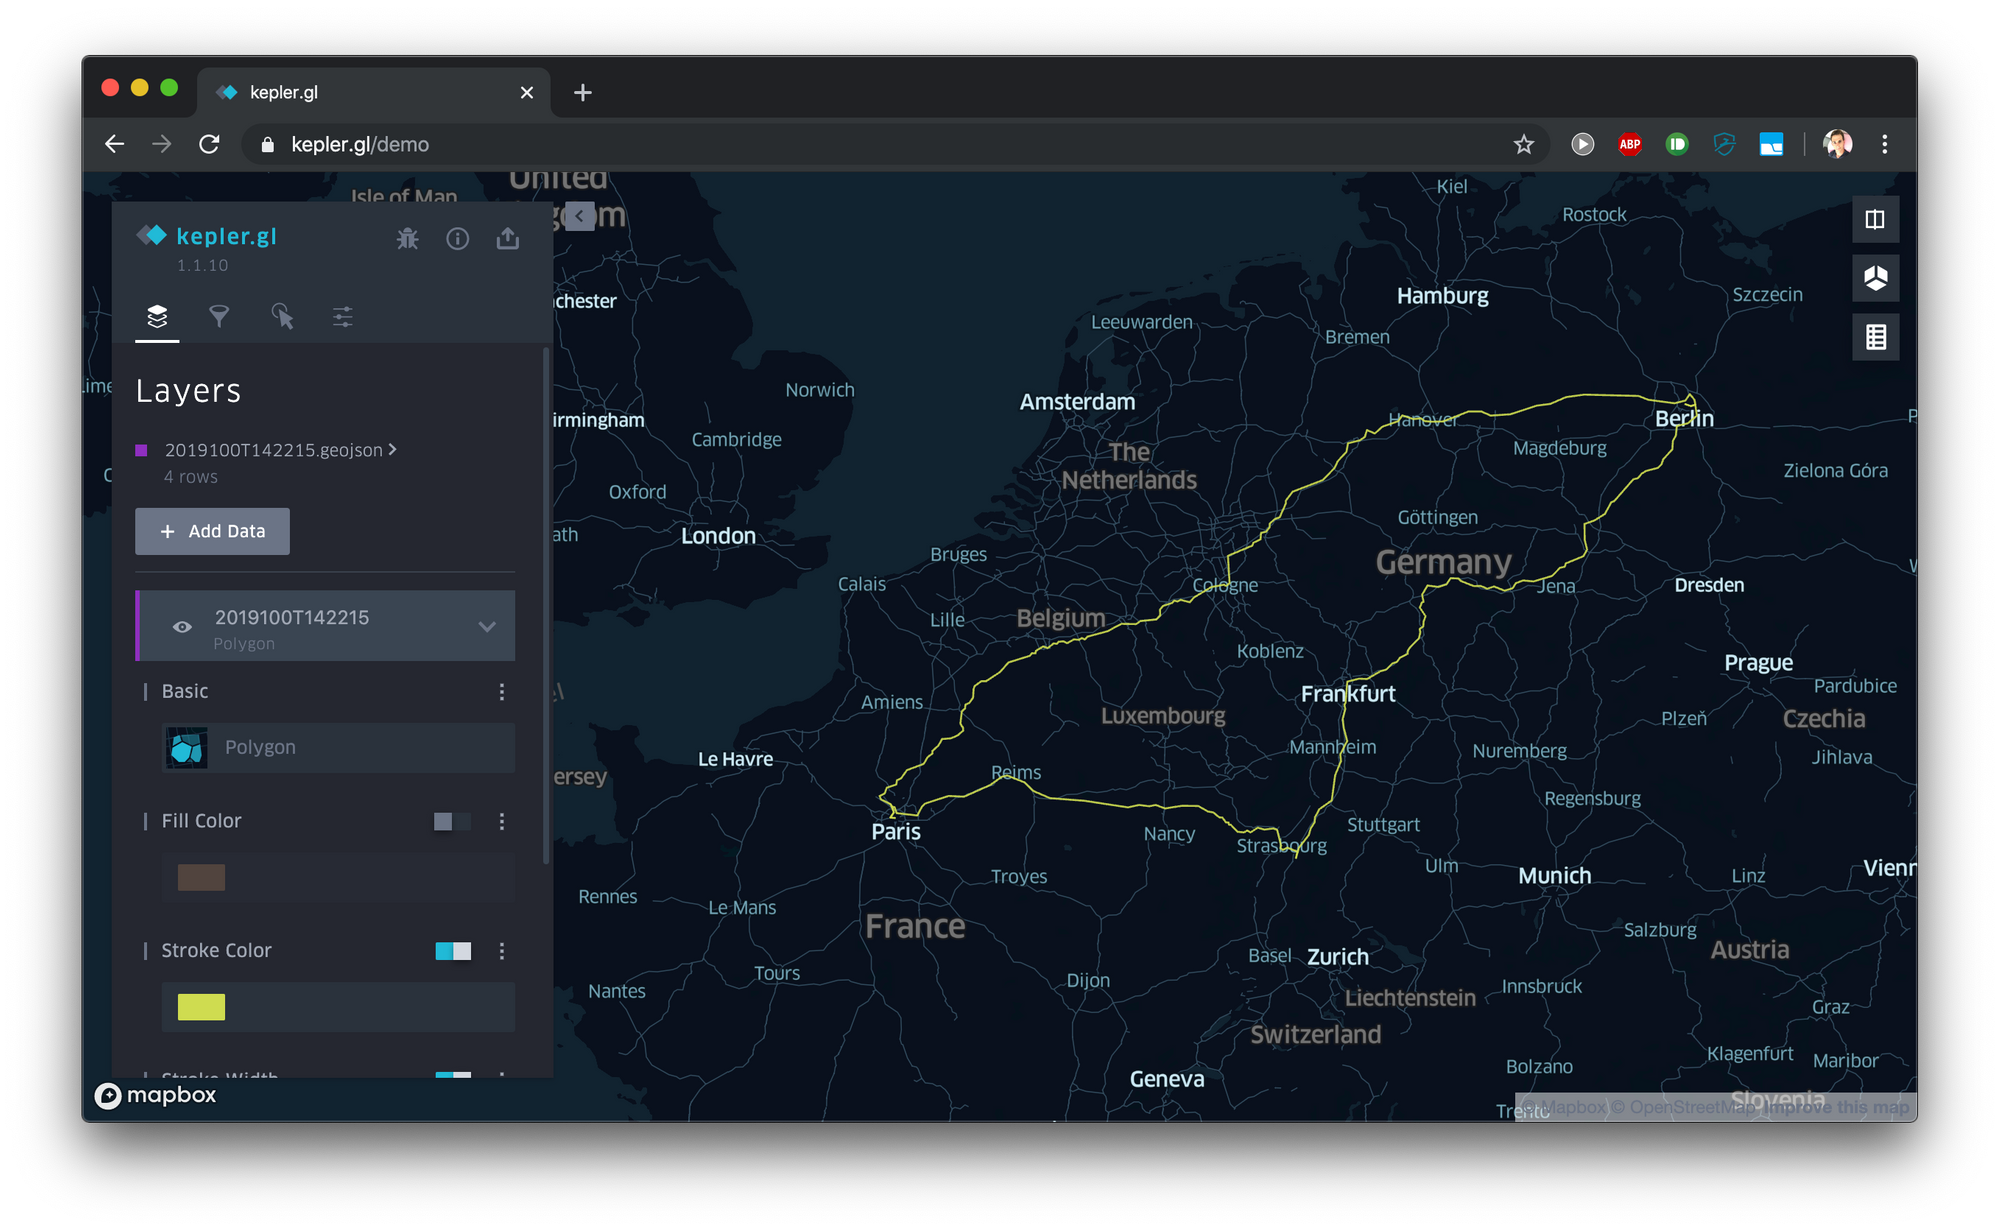 Screenshot of Kepler.gl showing the GeoJSON created in the previous screenshot.